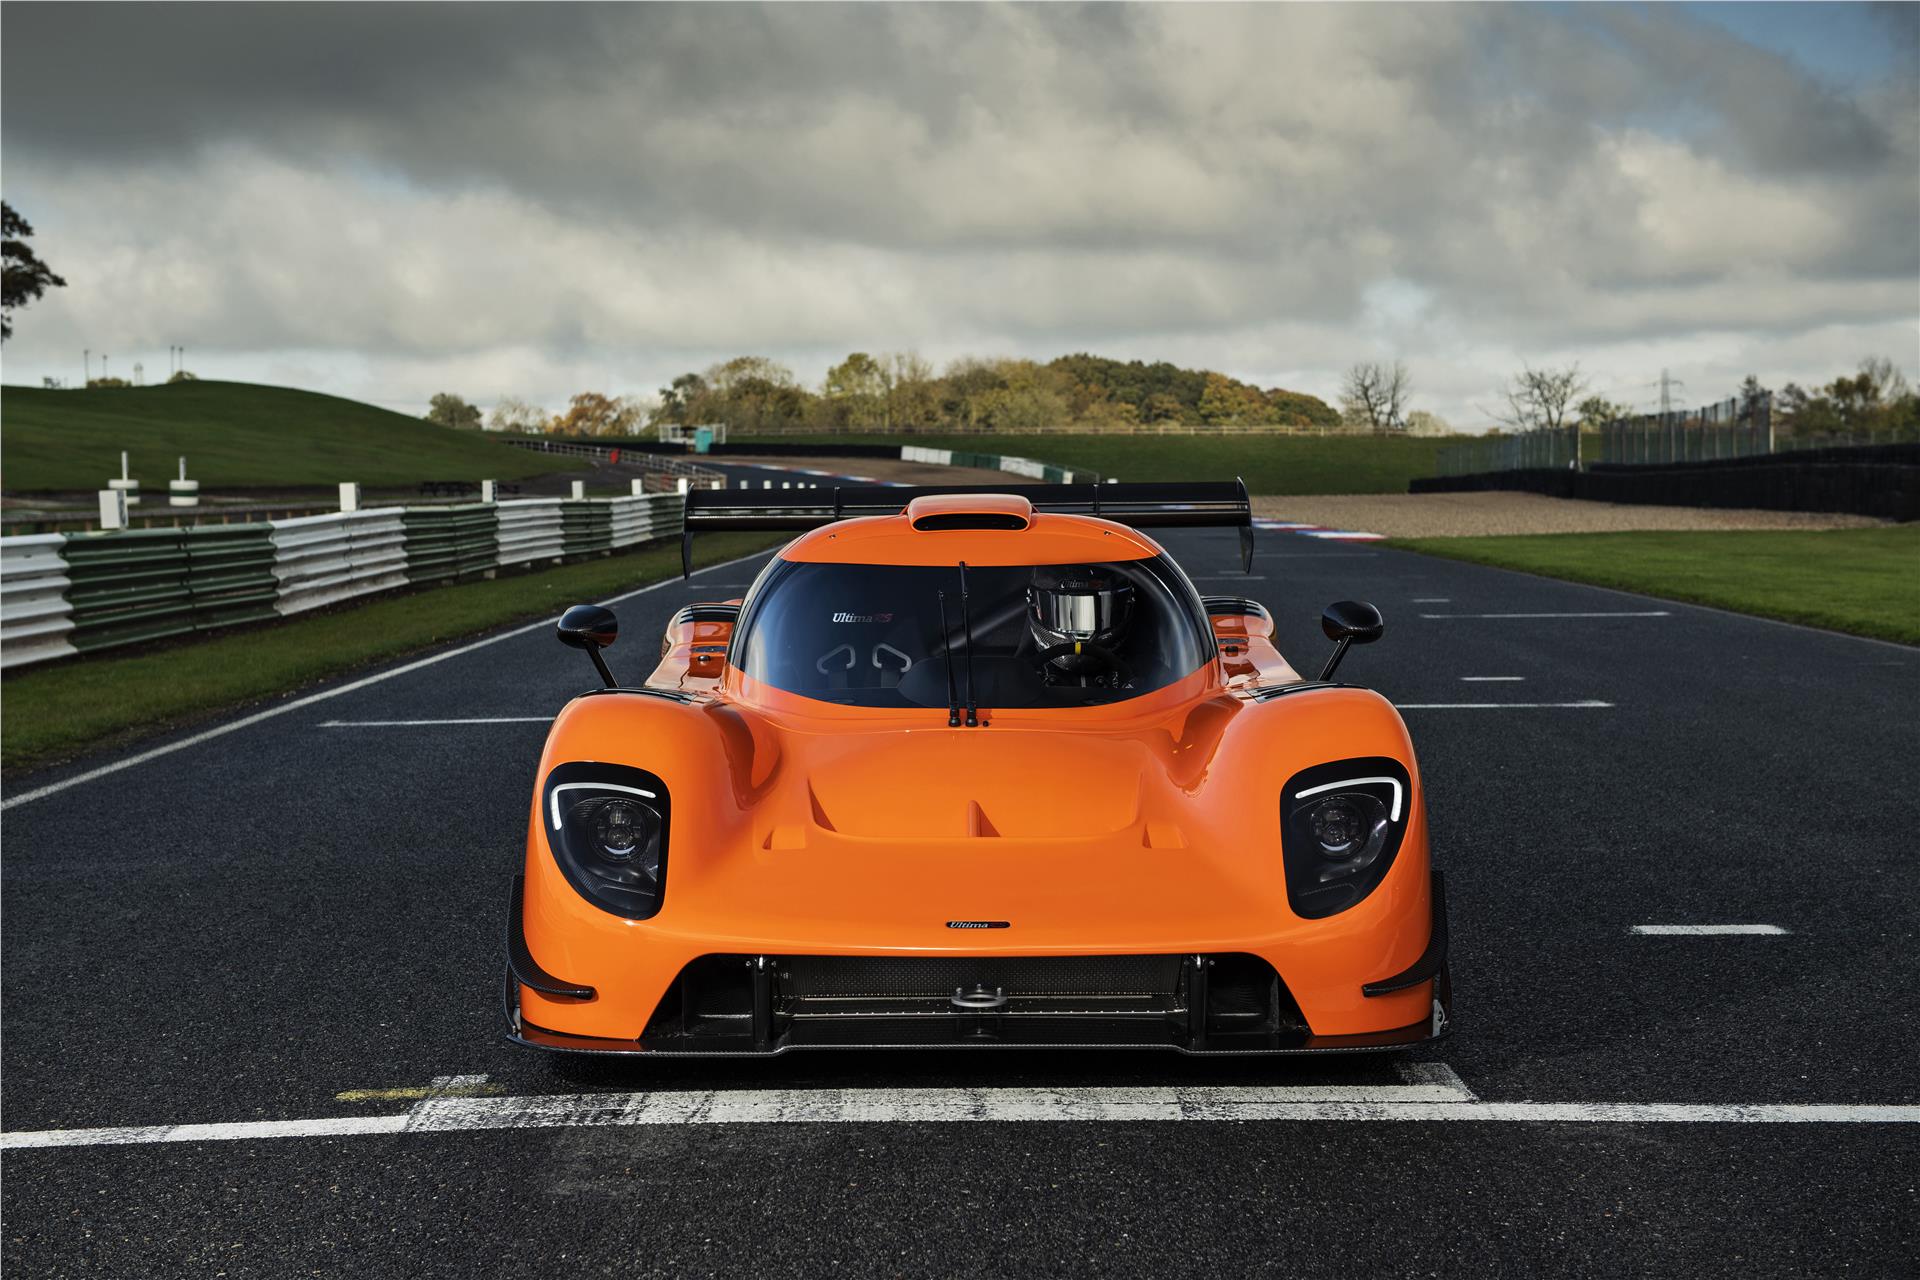 Image showing the frontal view of an orange Ultima RS on a race track.